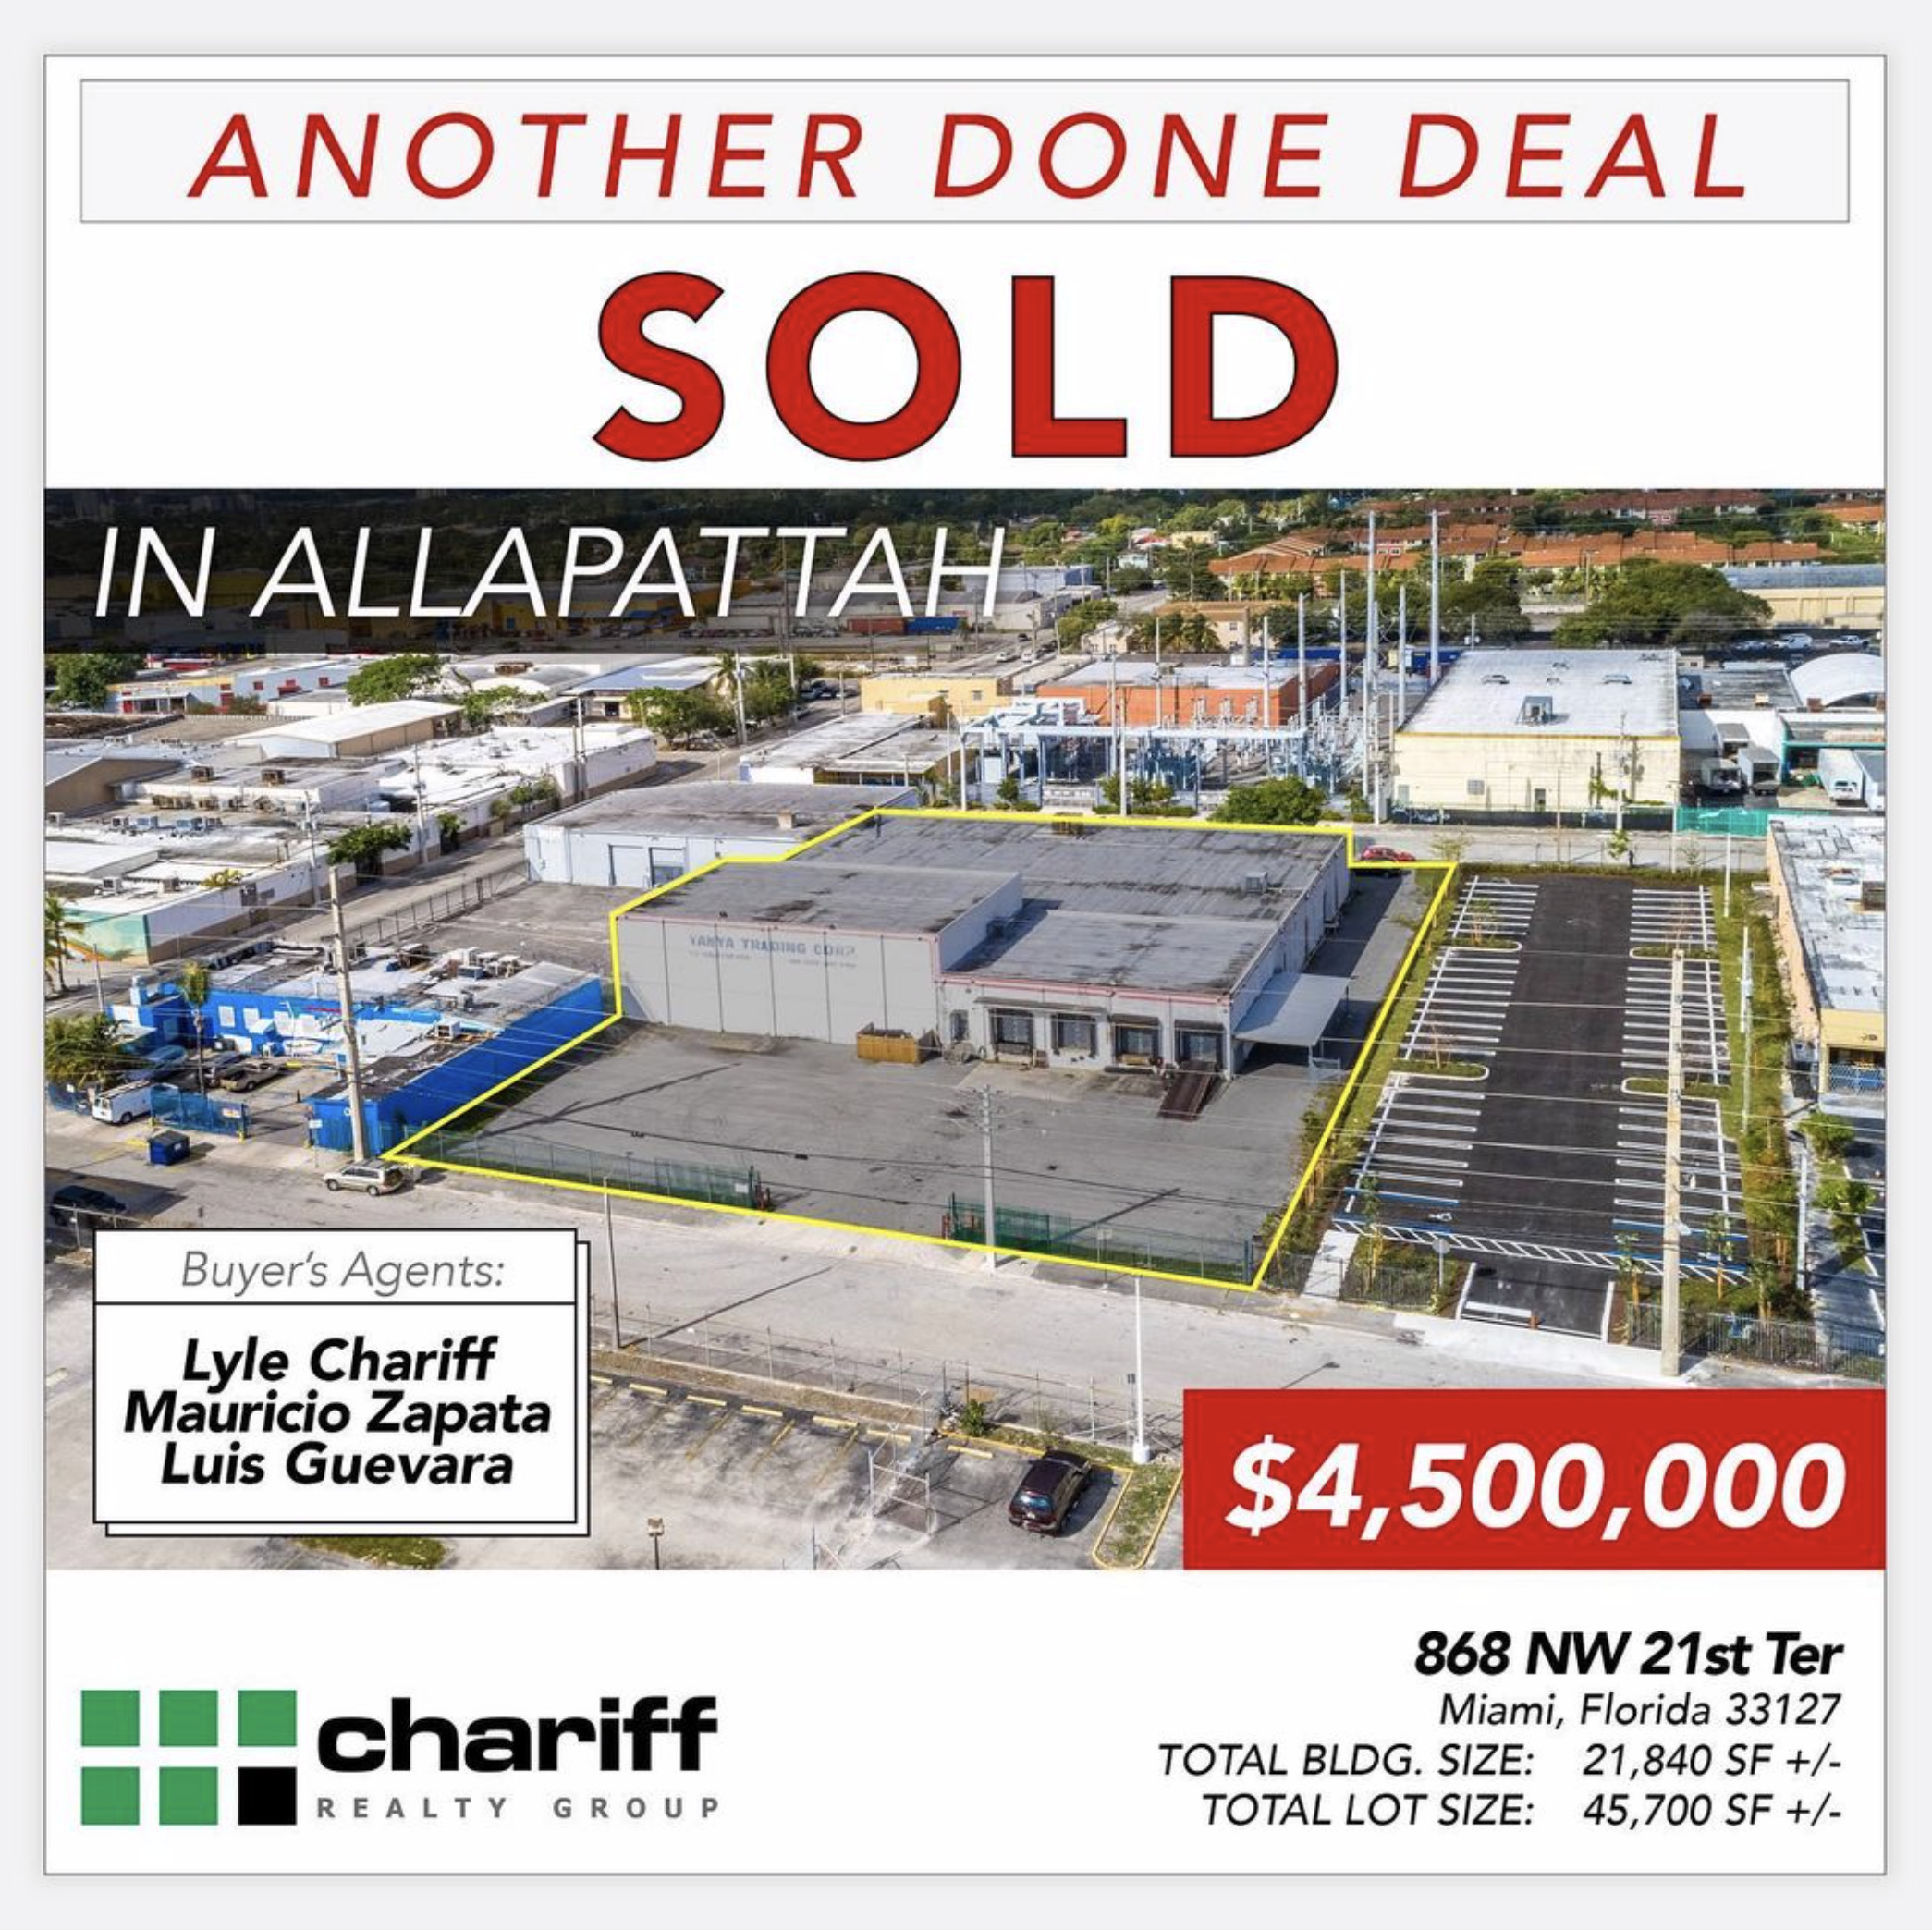 868 NW 21st Ter - Another Done Deal-Sold-Allapattah-Miami-Florida-33127-Chariff Realty Group